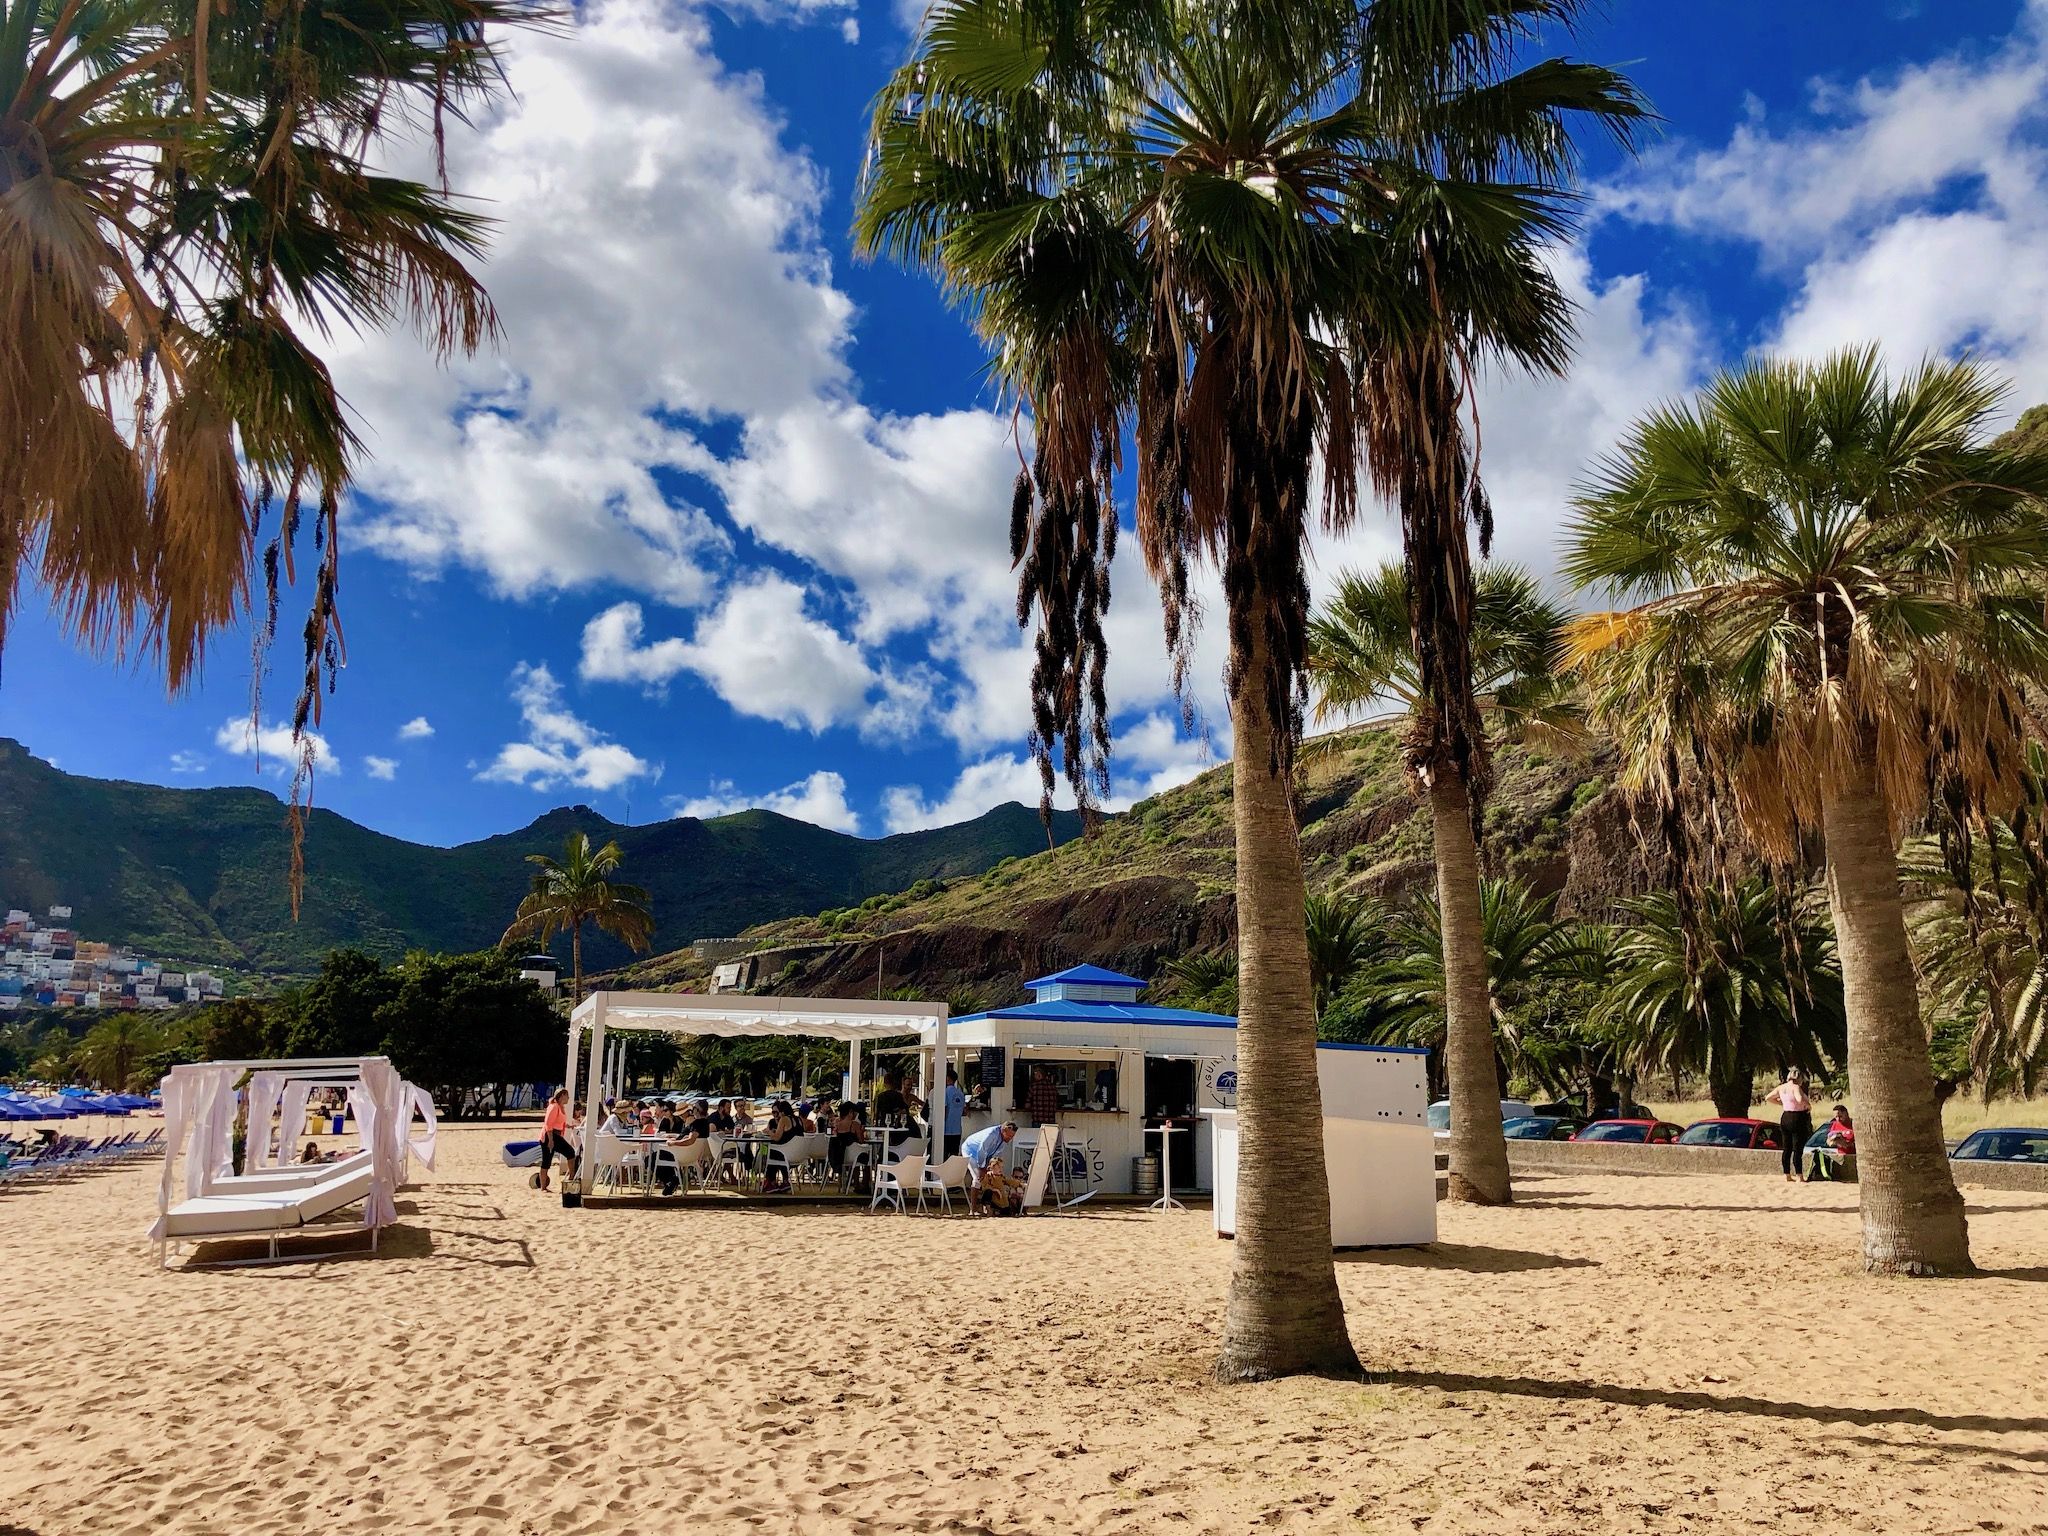 At the Playa de las Teresitas beach you can also get something to eat in a relaxed and relatively cheap way - we recommend the Ensaladilla. Photo: Sascha Tegtmeyer